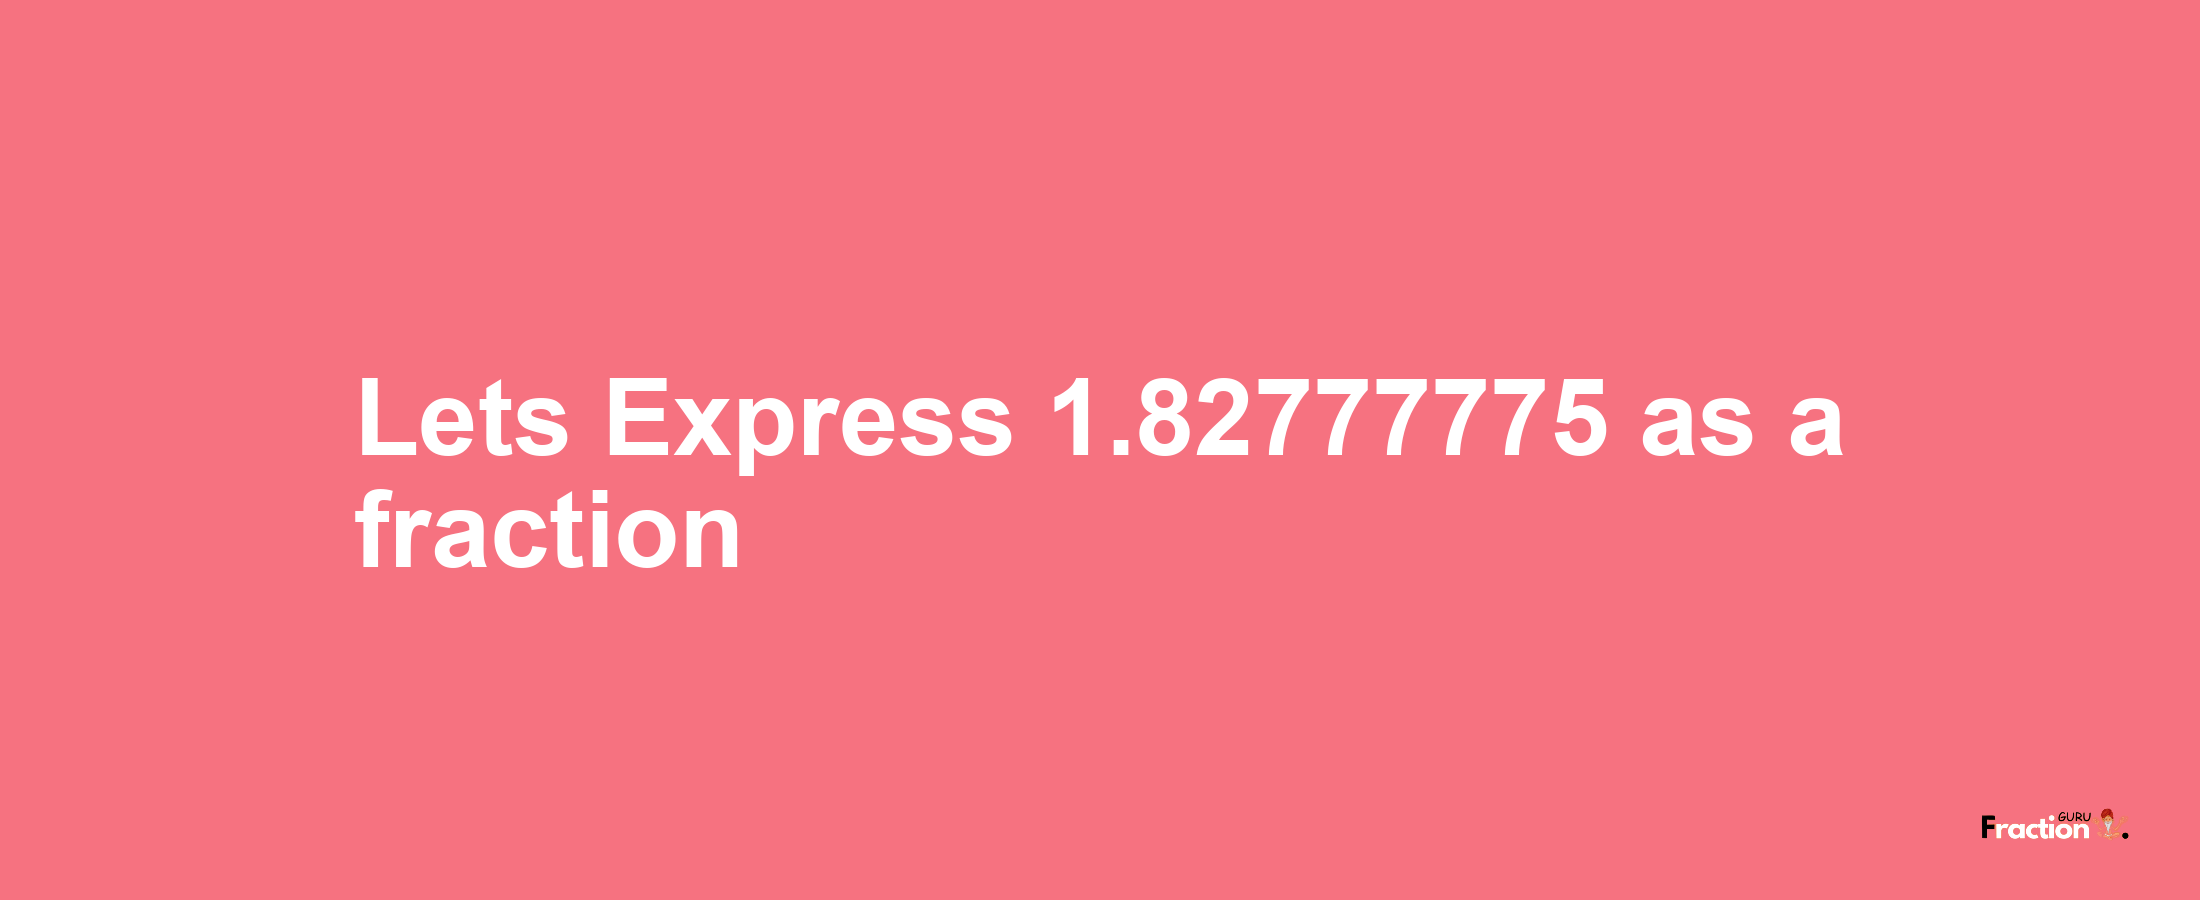 Lets Express 1.82777775 as afraction